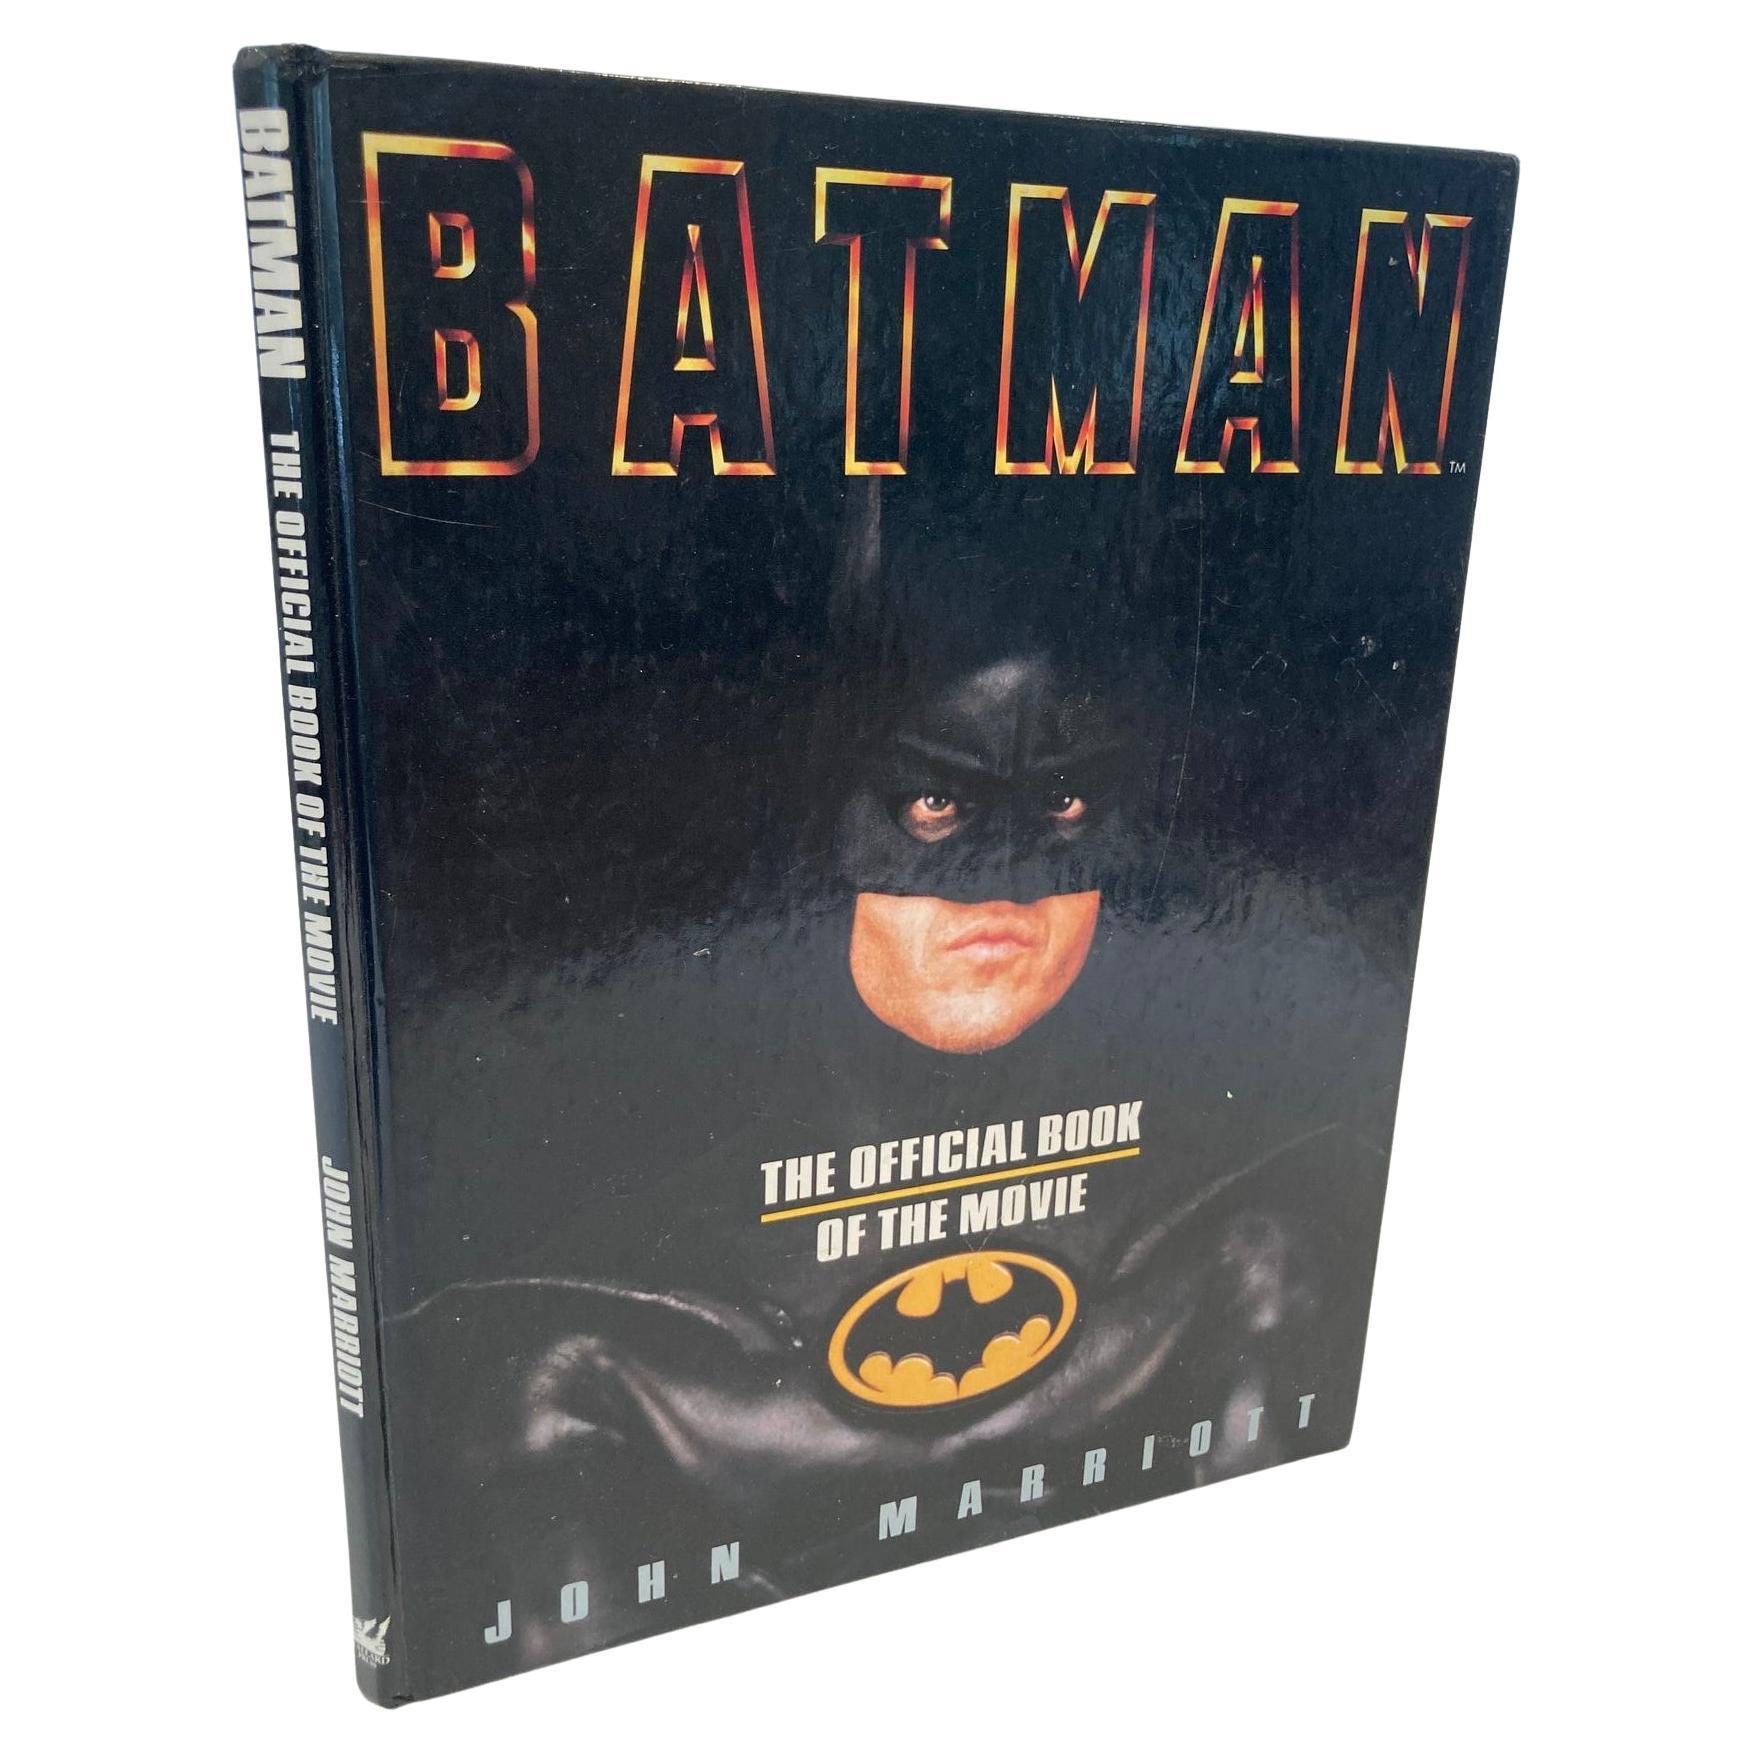 Batman: the Official Book of the Movie by John Marriott Hardcover, 1989